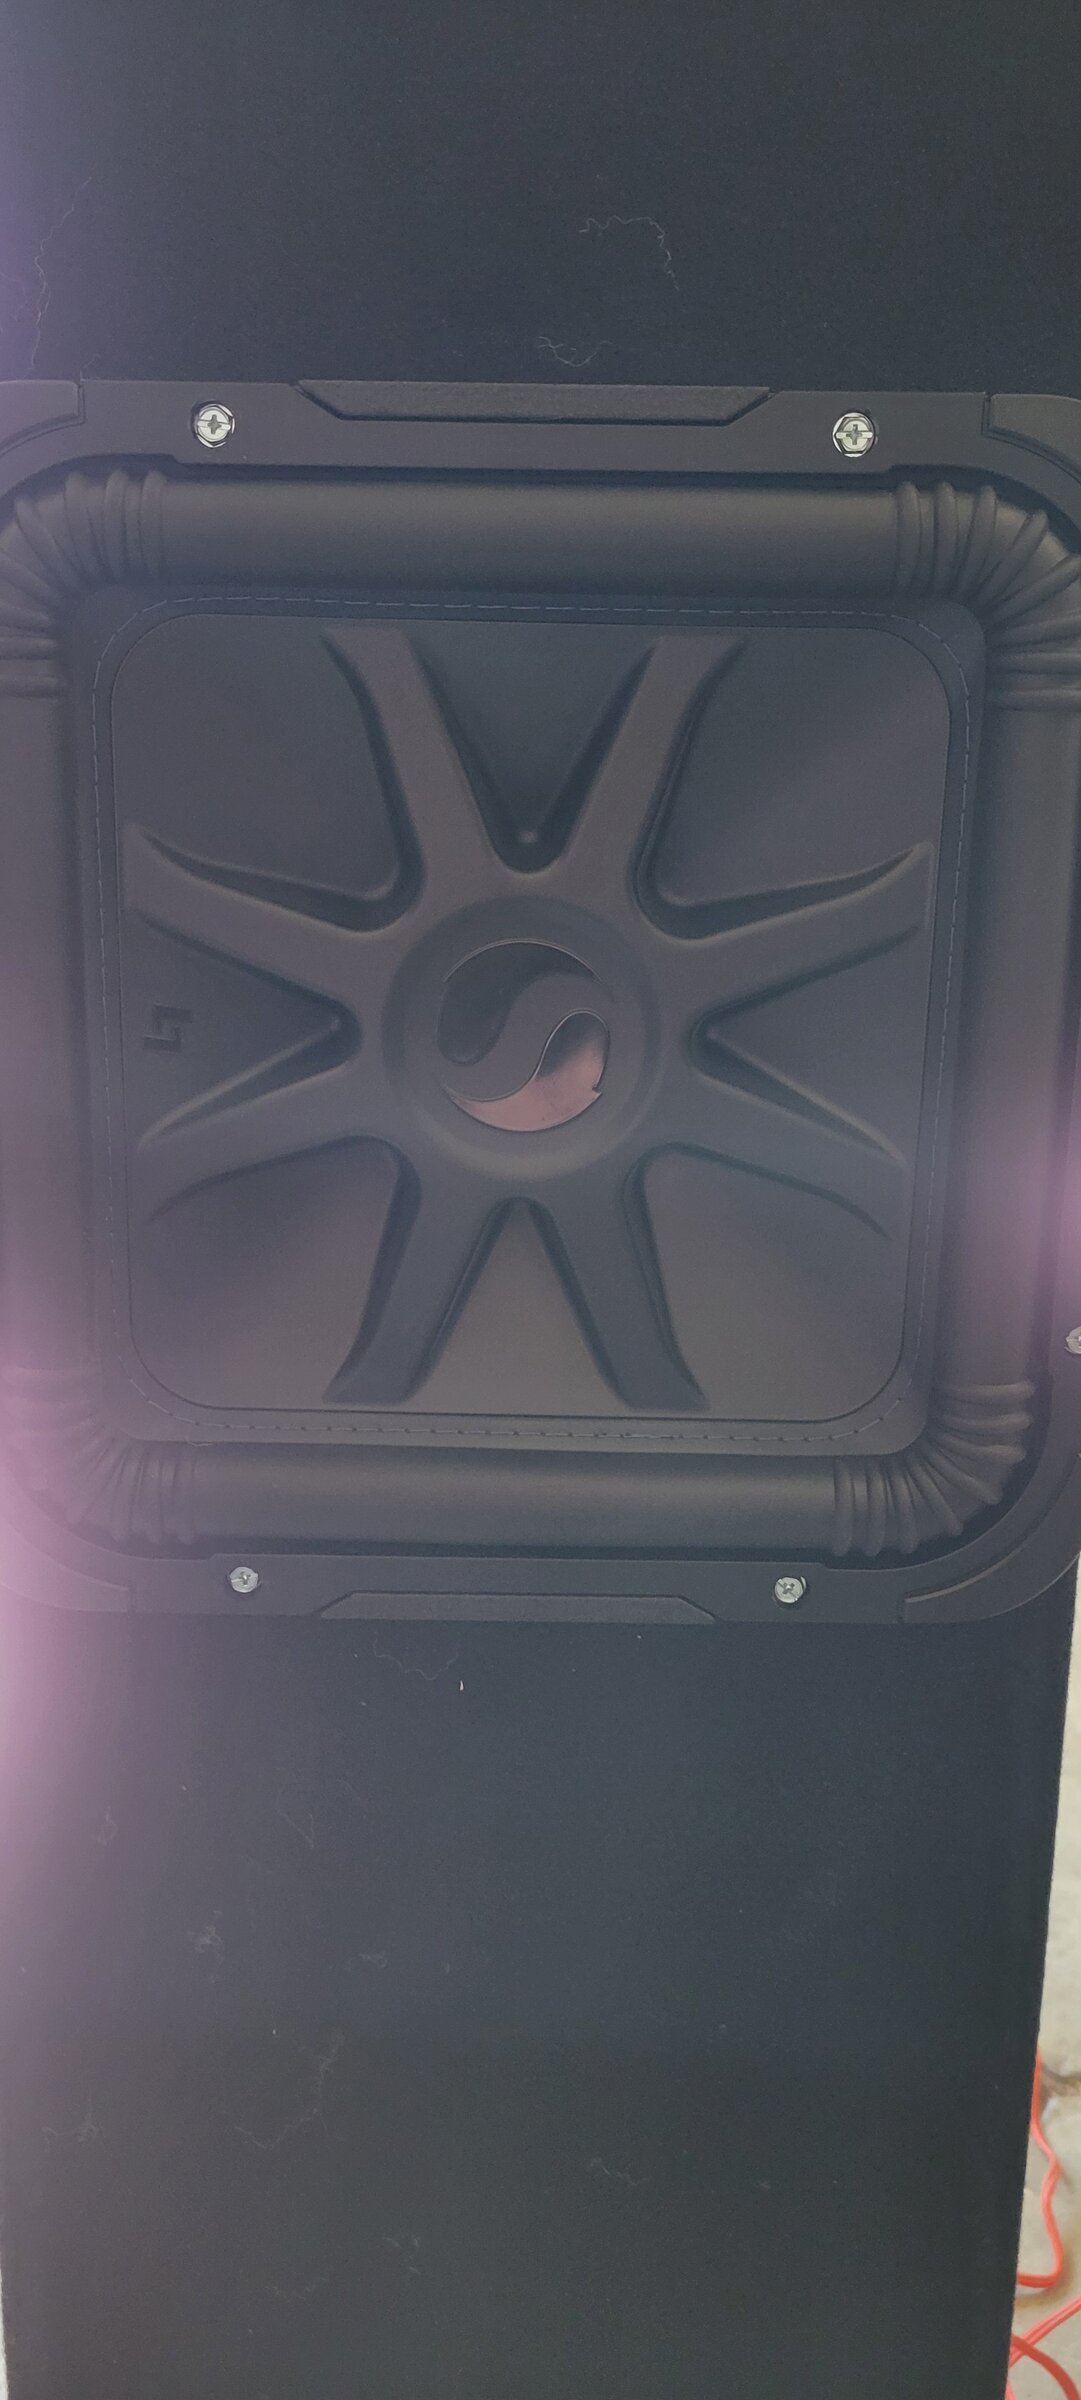 Ford F-150 Lightning Kicker L7S with Supercrew sounds +2 full length box, & LMI seat lift brand new 20220313_112831